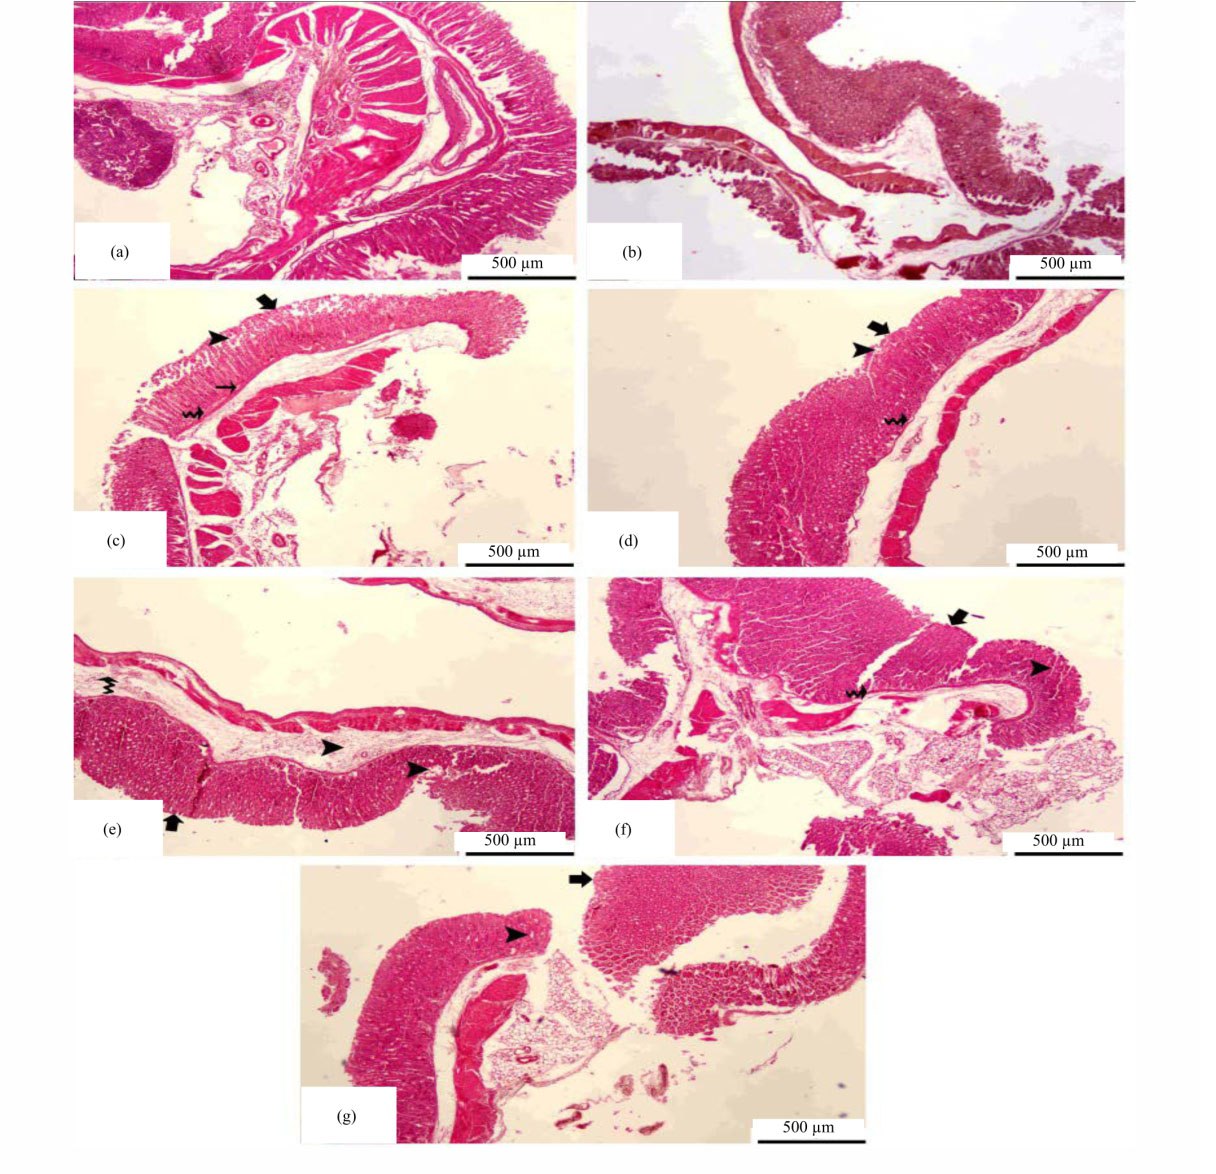 Image for - Magnolin Alleviates Gastric Ulcer Induced by Ethanol/HCl in Mice Model via Oxidative Stress and NF-κB Pathway